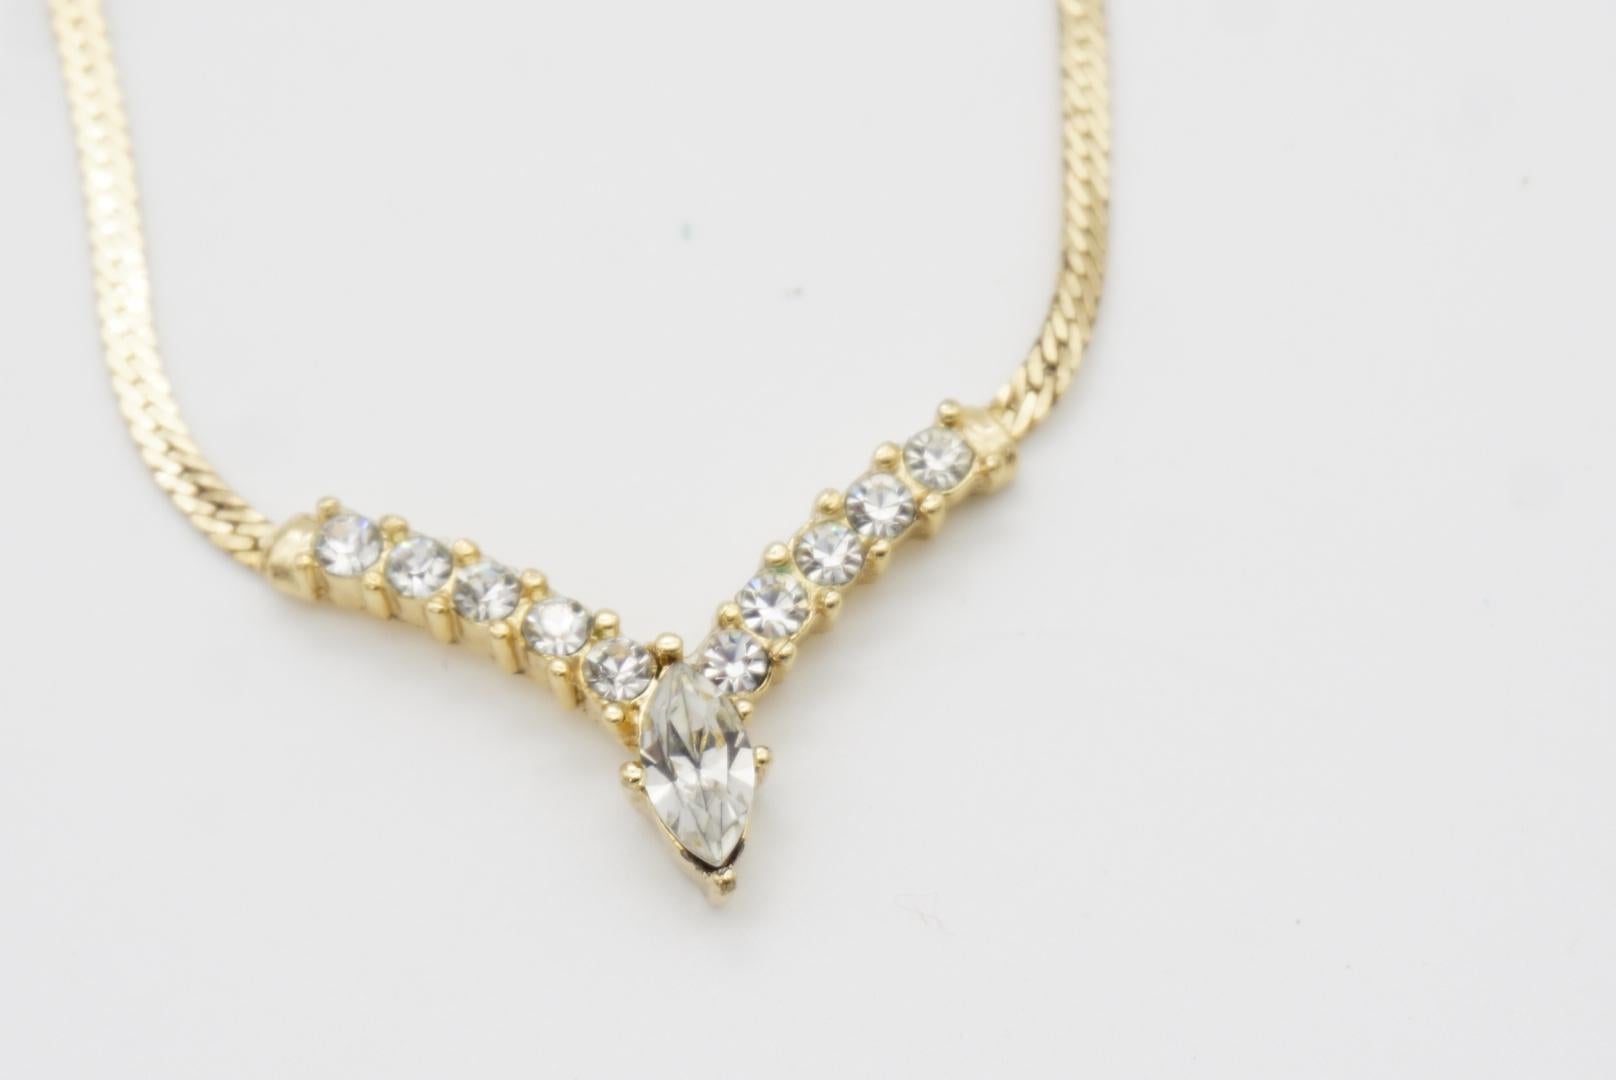 Christian Dior Vintage 1980s Whole Crystals Triangle V Pendant Chain Necklace For Sale 6